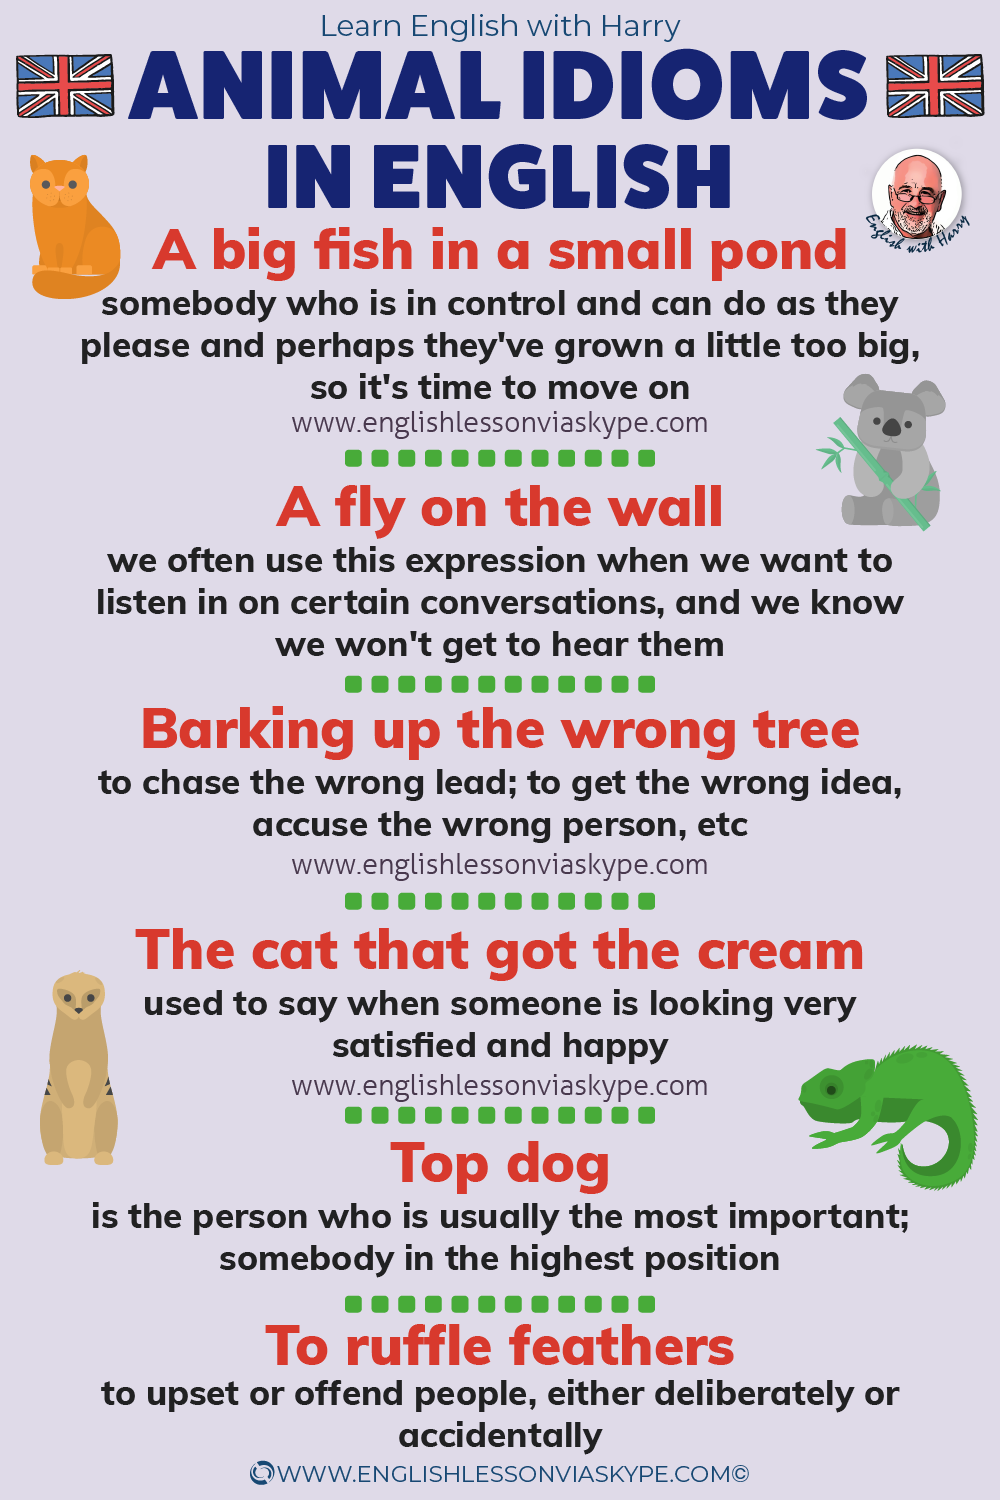 11 Animal Idioms In English • Learn English with Harry 👴